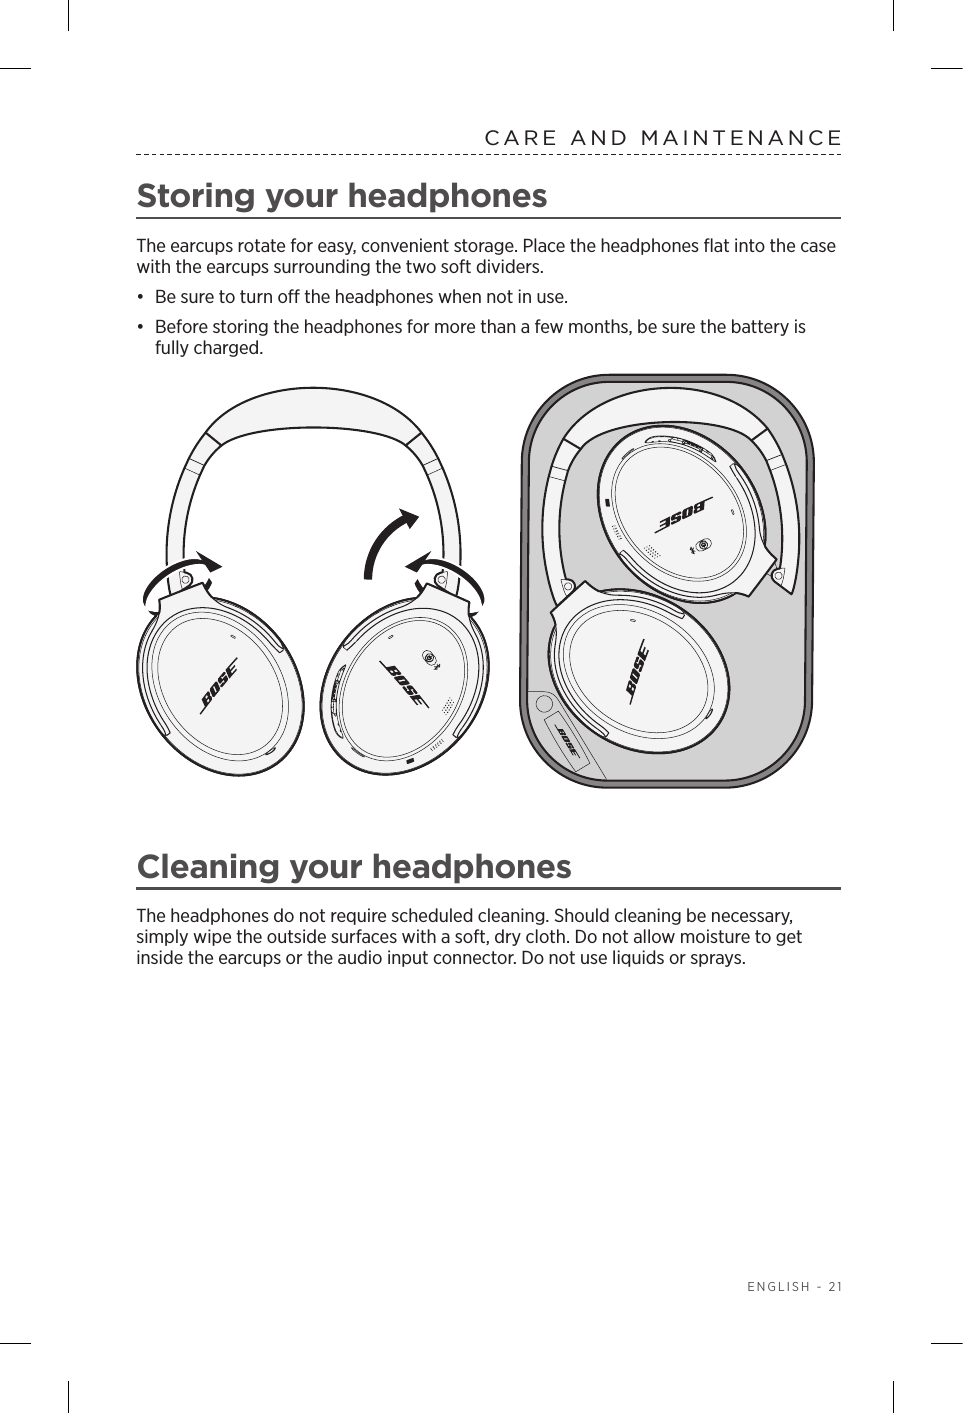   ENGLISH - 21CARE AND MAINTENANCEStoring your headphonesThe earcups rotate for easy, convenient storage. Place the headphones ﬂat into the case with the earcups surrounding the two soft dividers.•  Be sure to turn o the headphones when not in use. •  Before storing the headphones for more than a few months, be sure the battery is fully charged. Cleaning your headphonesThe headphones do not require scheduled cleaning. Should cleaning be necessary,  simply wipe the outside surfaces with a soft, dry cloth. Do not allow moisture to get inside the earcups or the audio input connector. Do not use liquids or sprays.